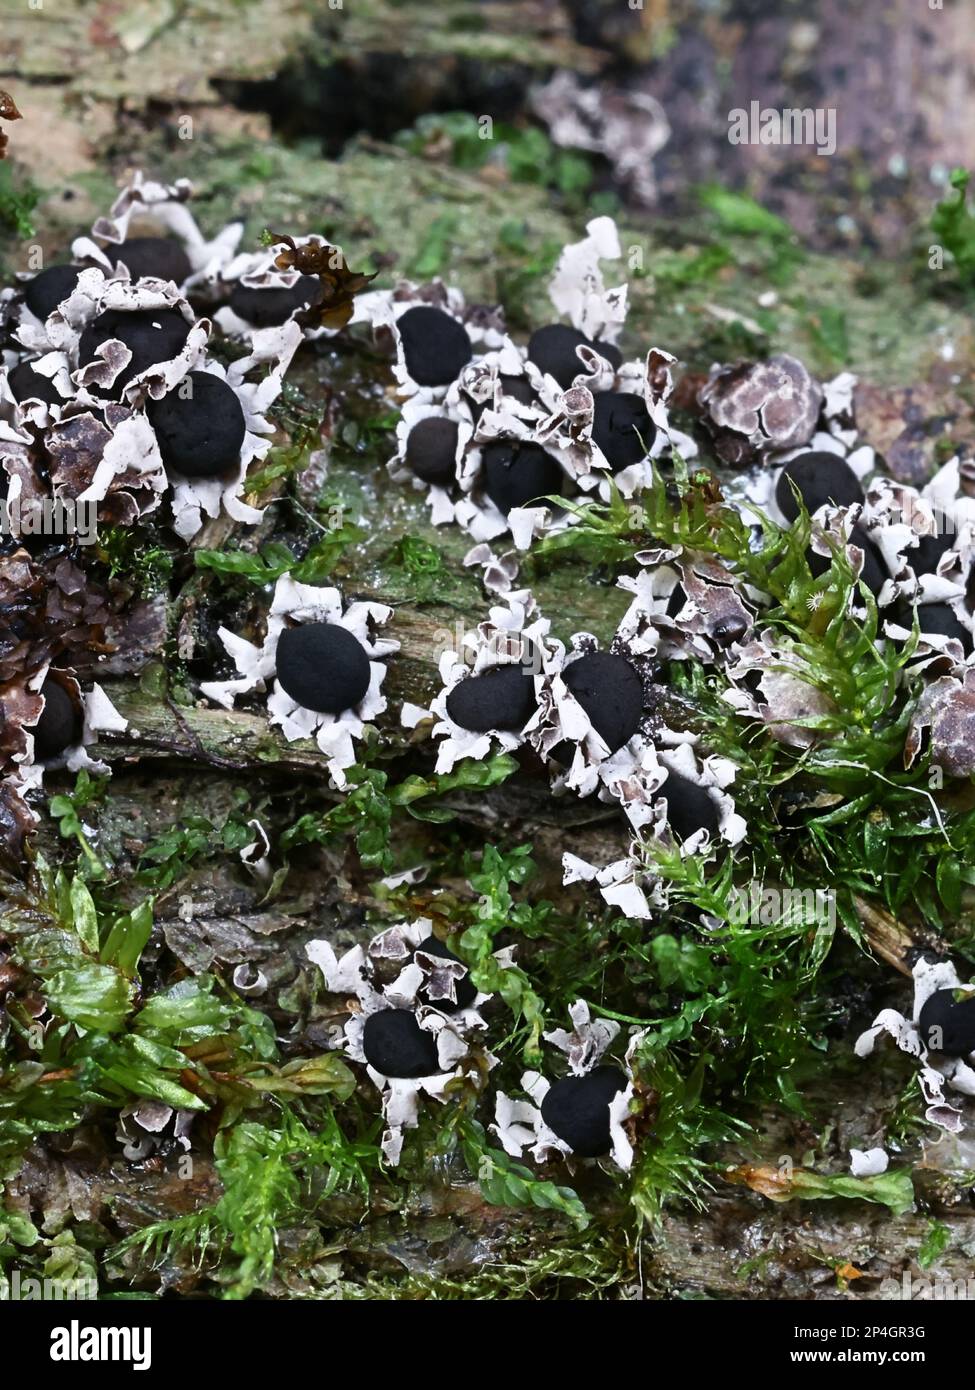 Diderma radiatum, slime mold from Finland, no common English name Stock Photo